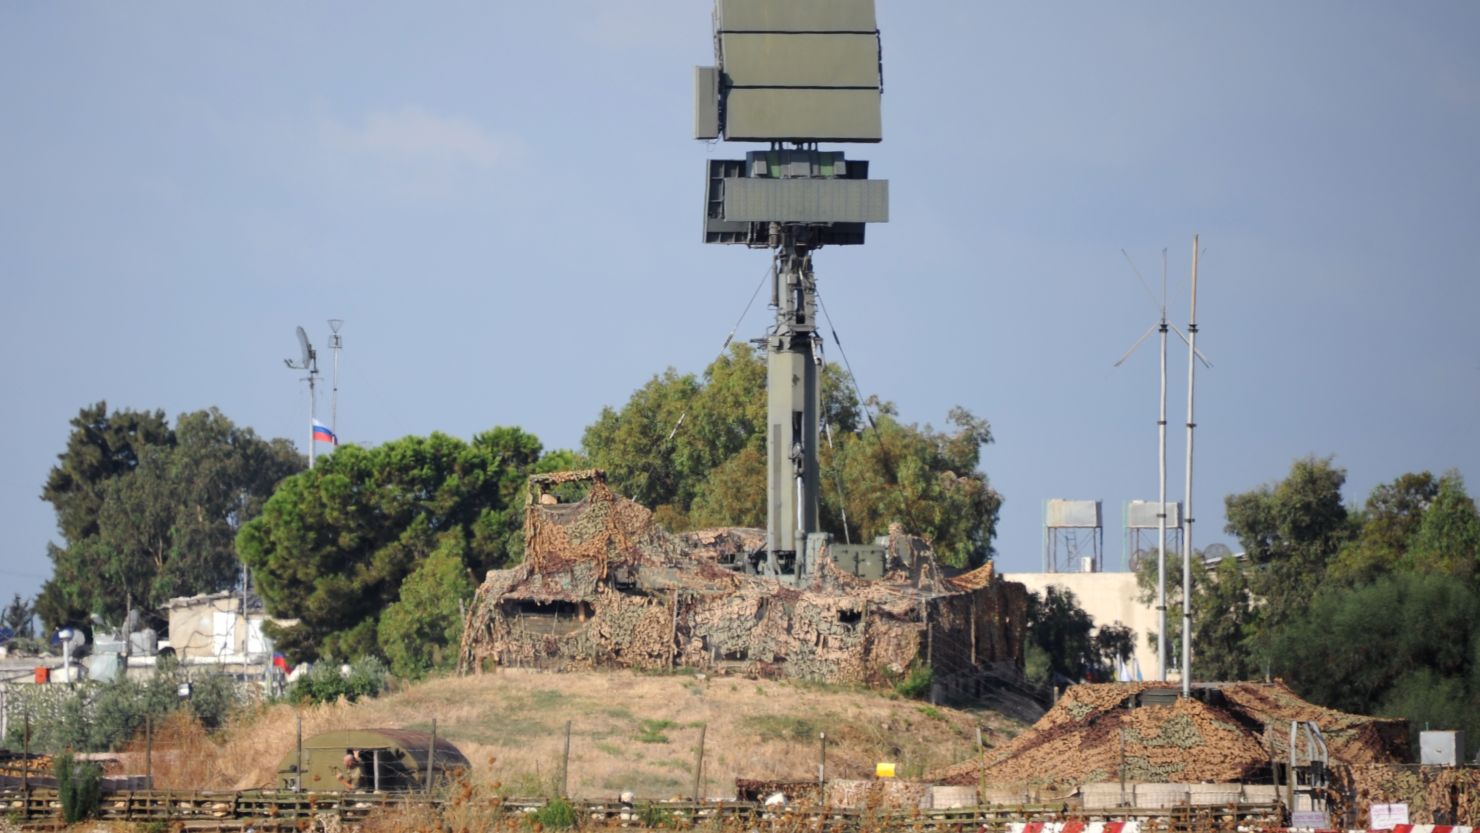 Part of the Russian military base of Hmeimim, south-east of the city of Latakia, in Syria.